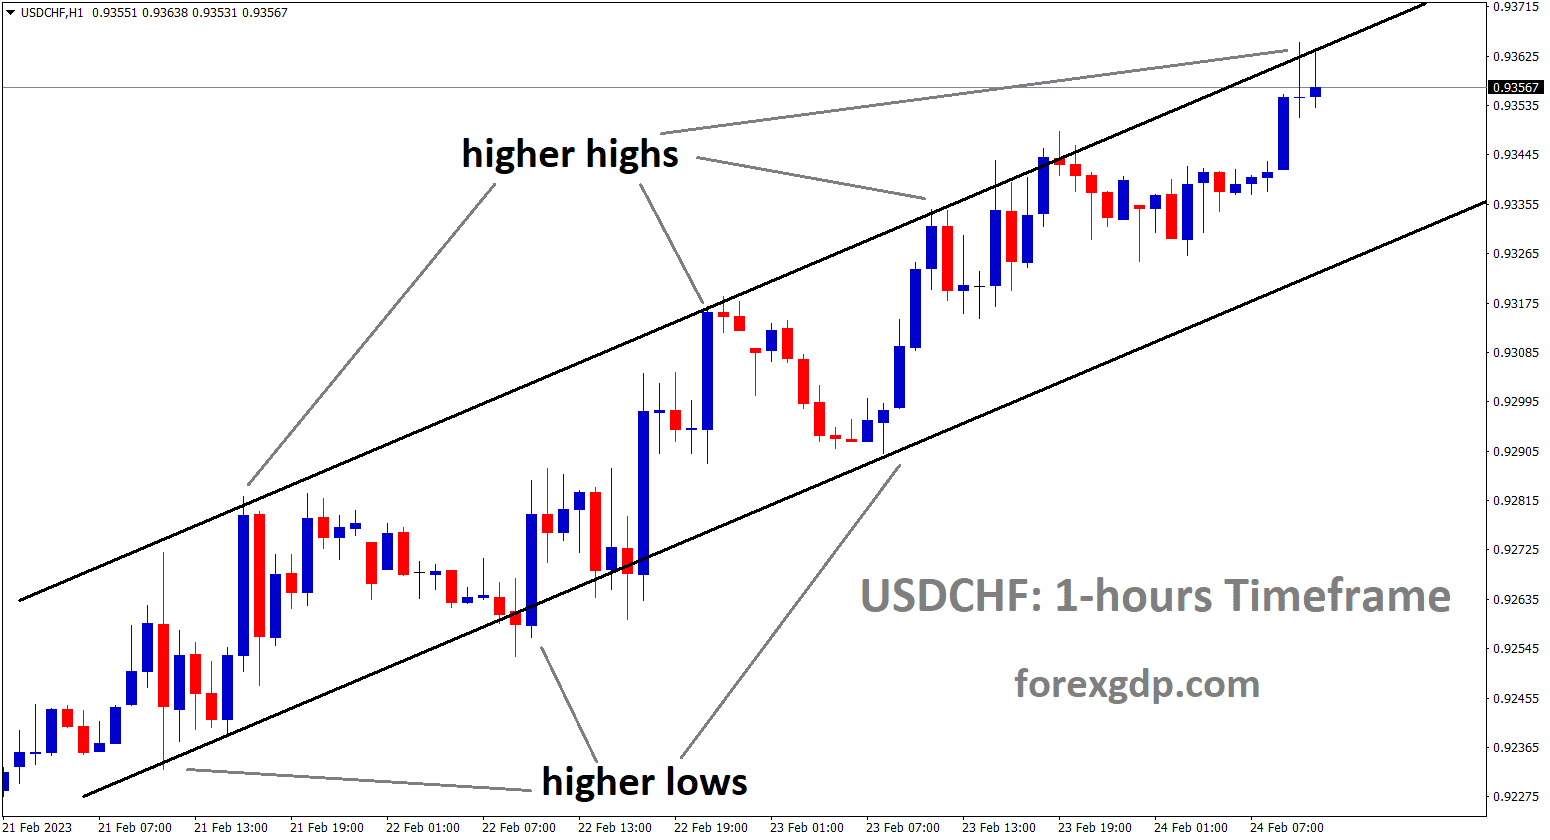 USDCHF is moving in Ascending channel and the market has reached the higher low area of the channel.